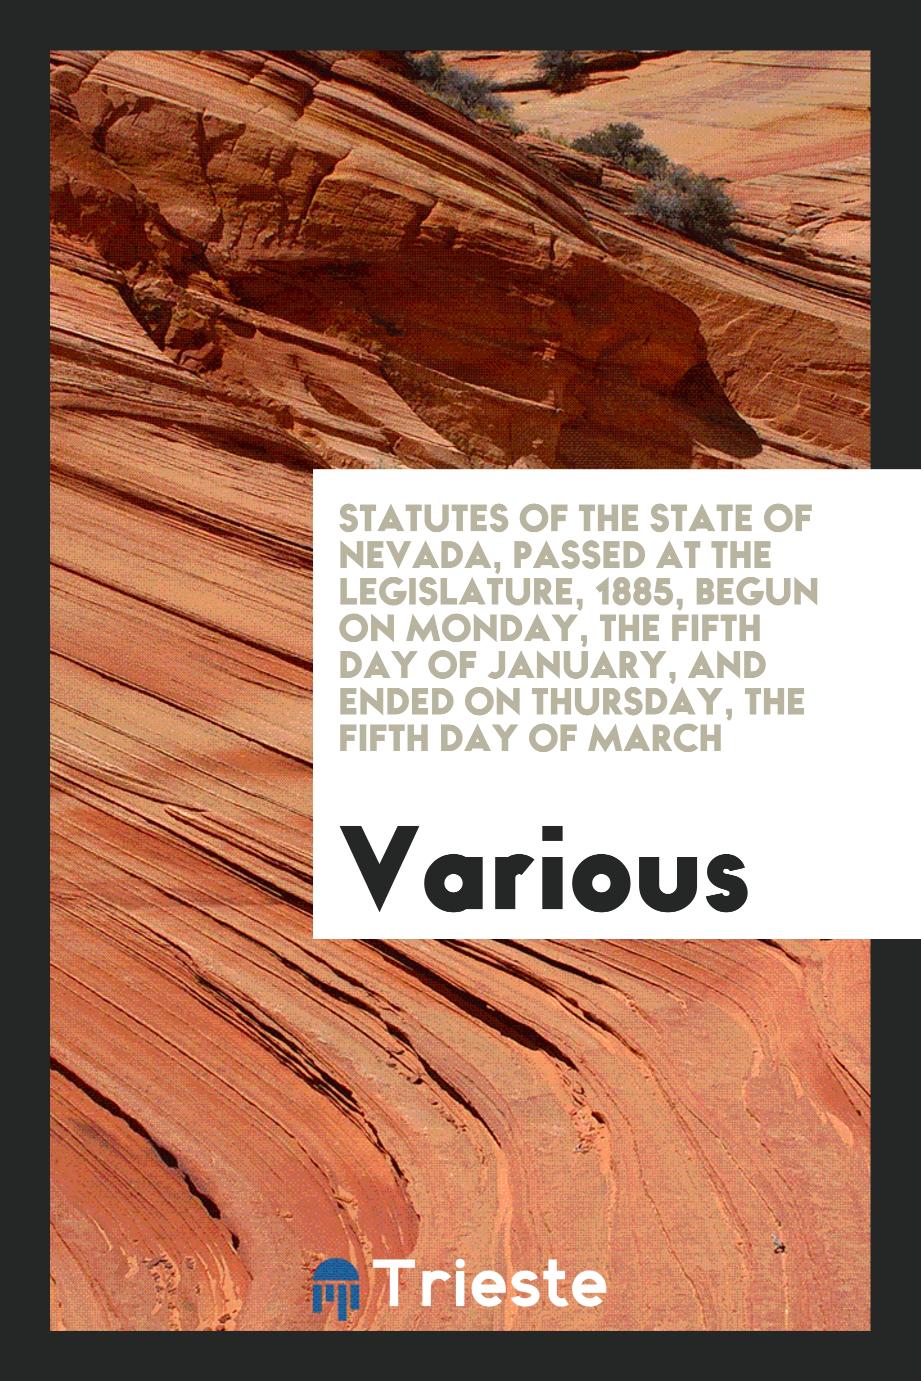 Statutes of the State of Nevada, Passed at the Legislature, 1885, Begun on Monday, the Fifth Day of January, and Ended on Thursday, the Fifth Day of March